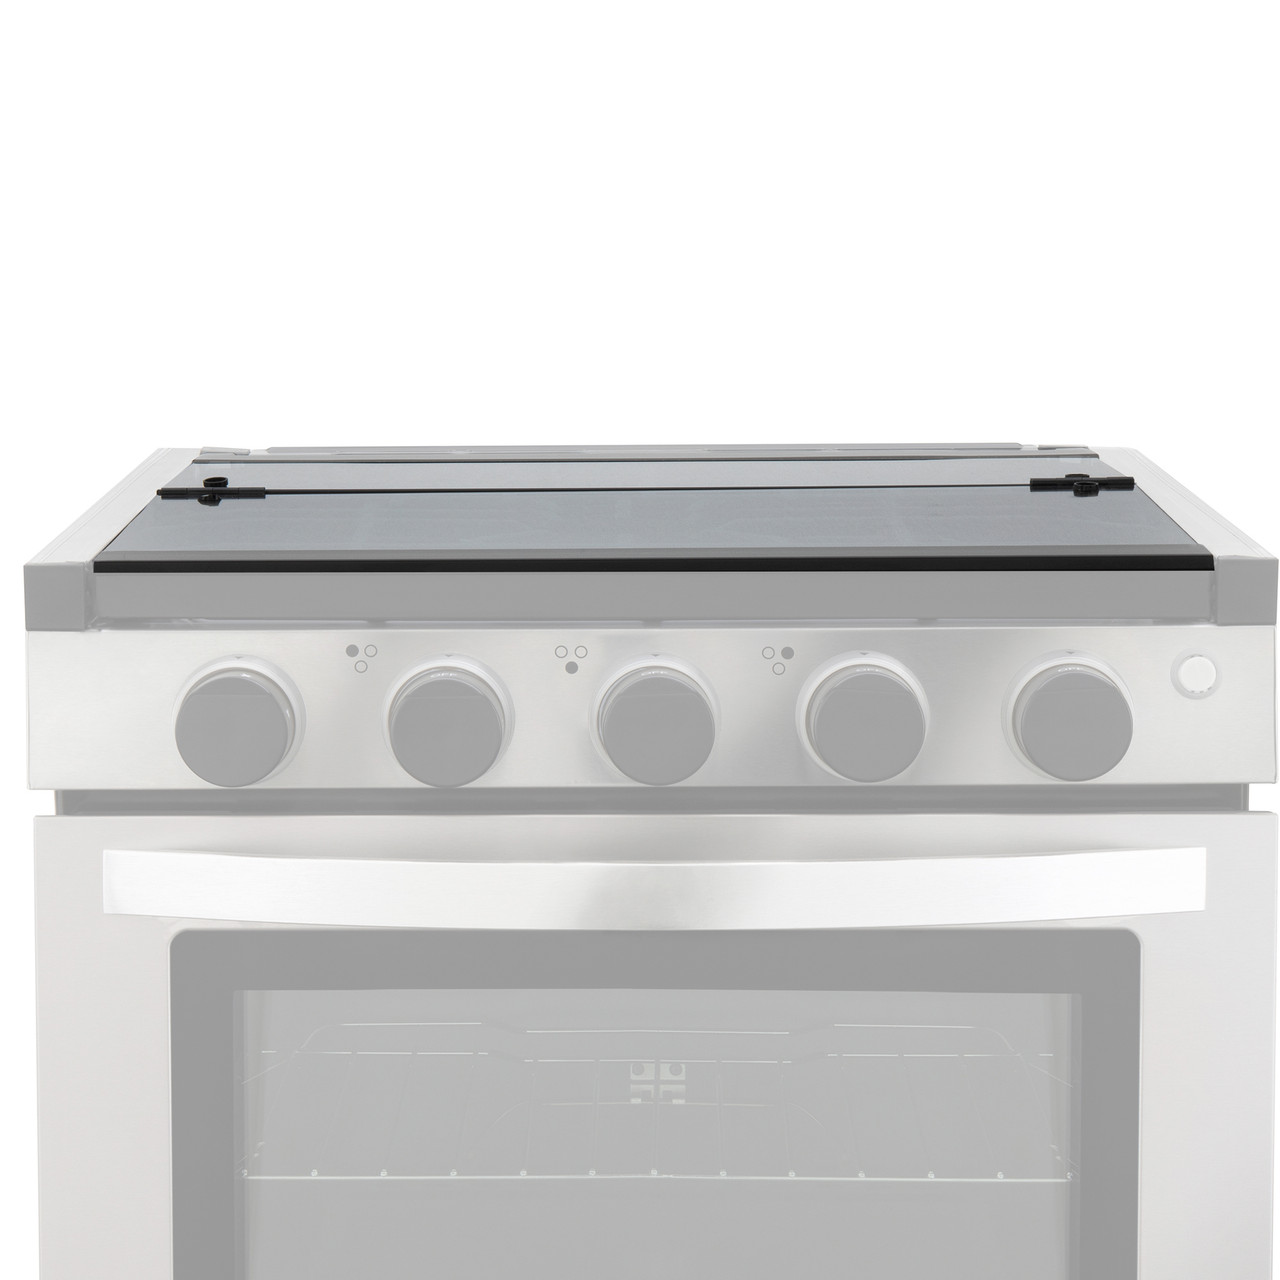 Replacement Glass Top for Stove - RecPro